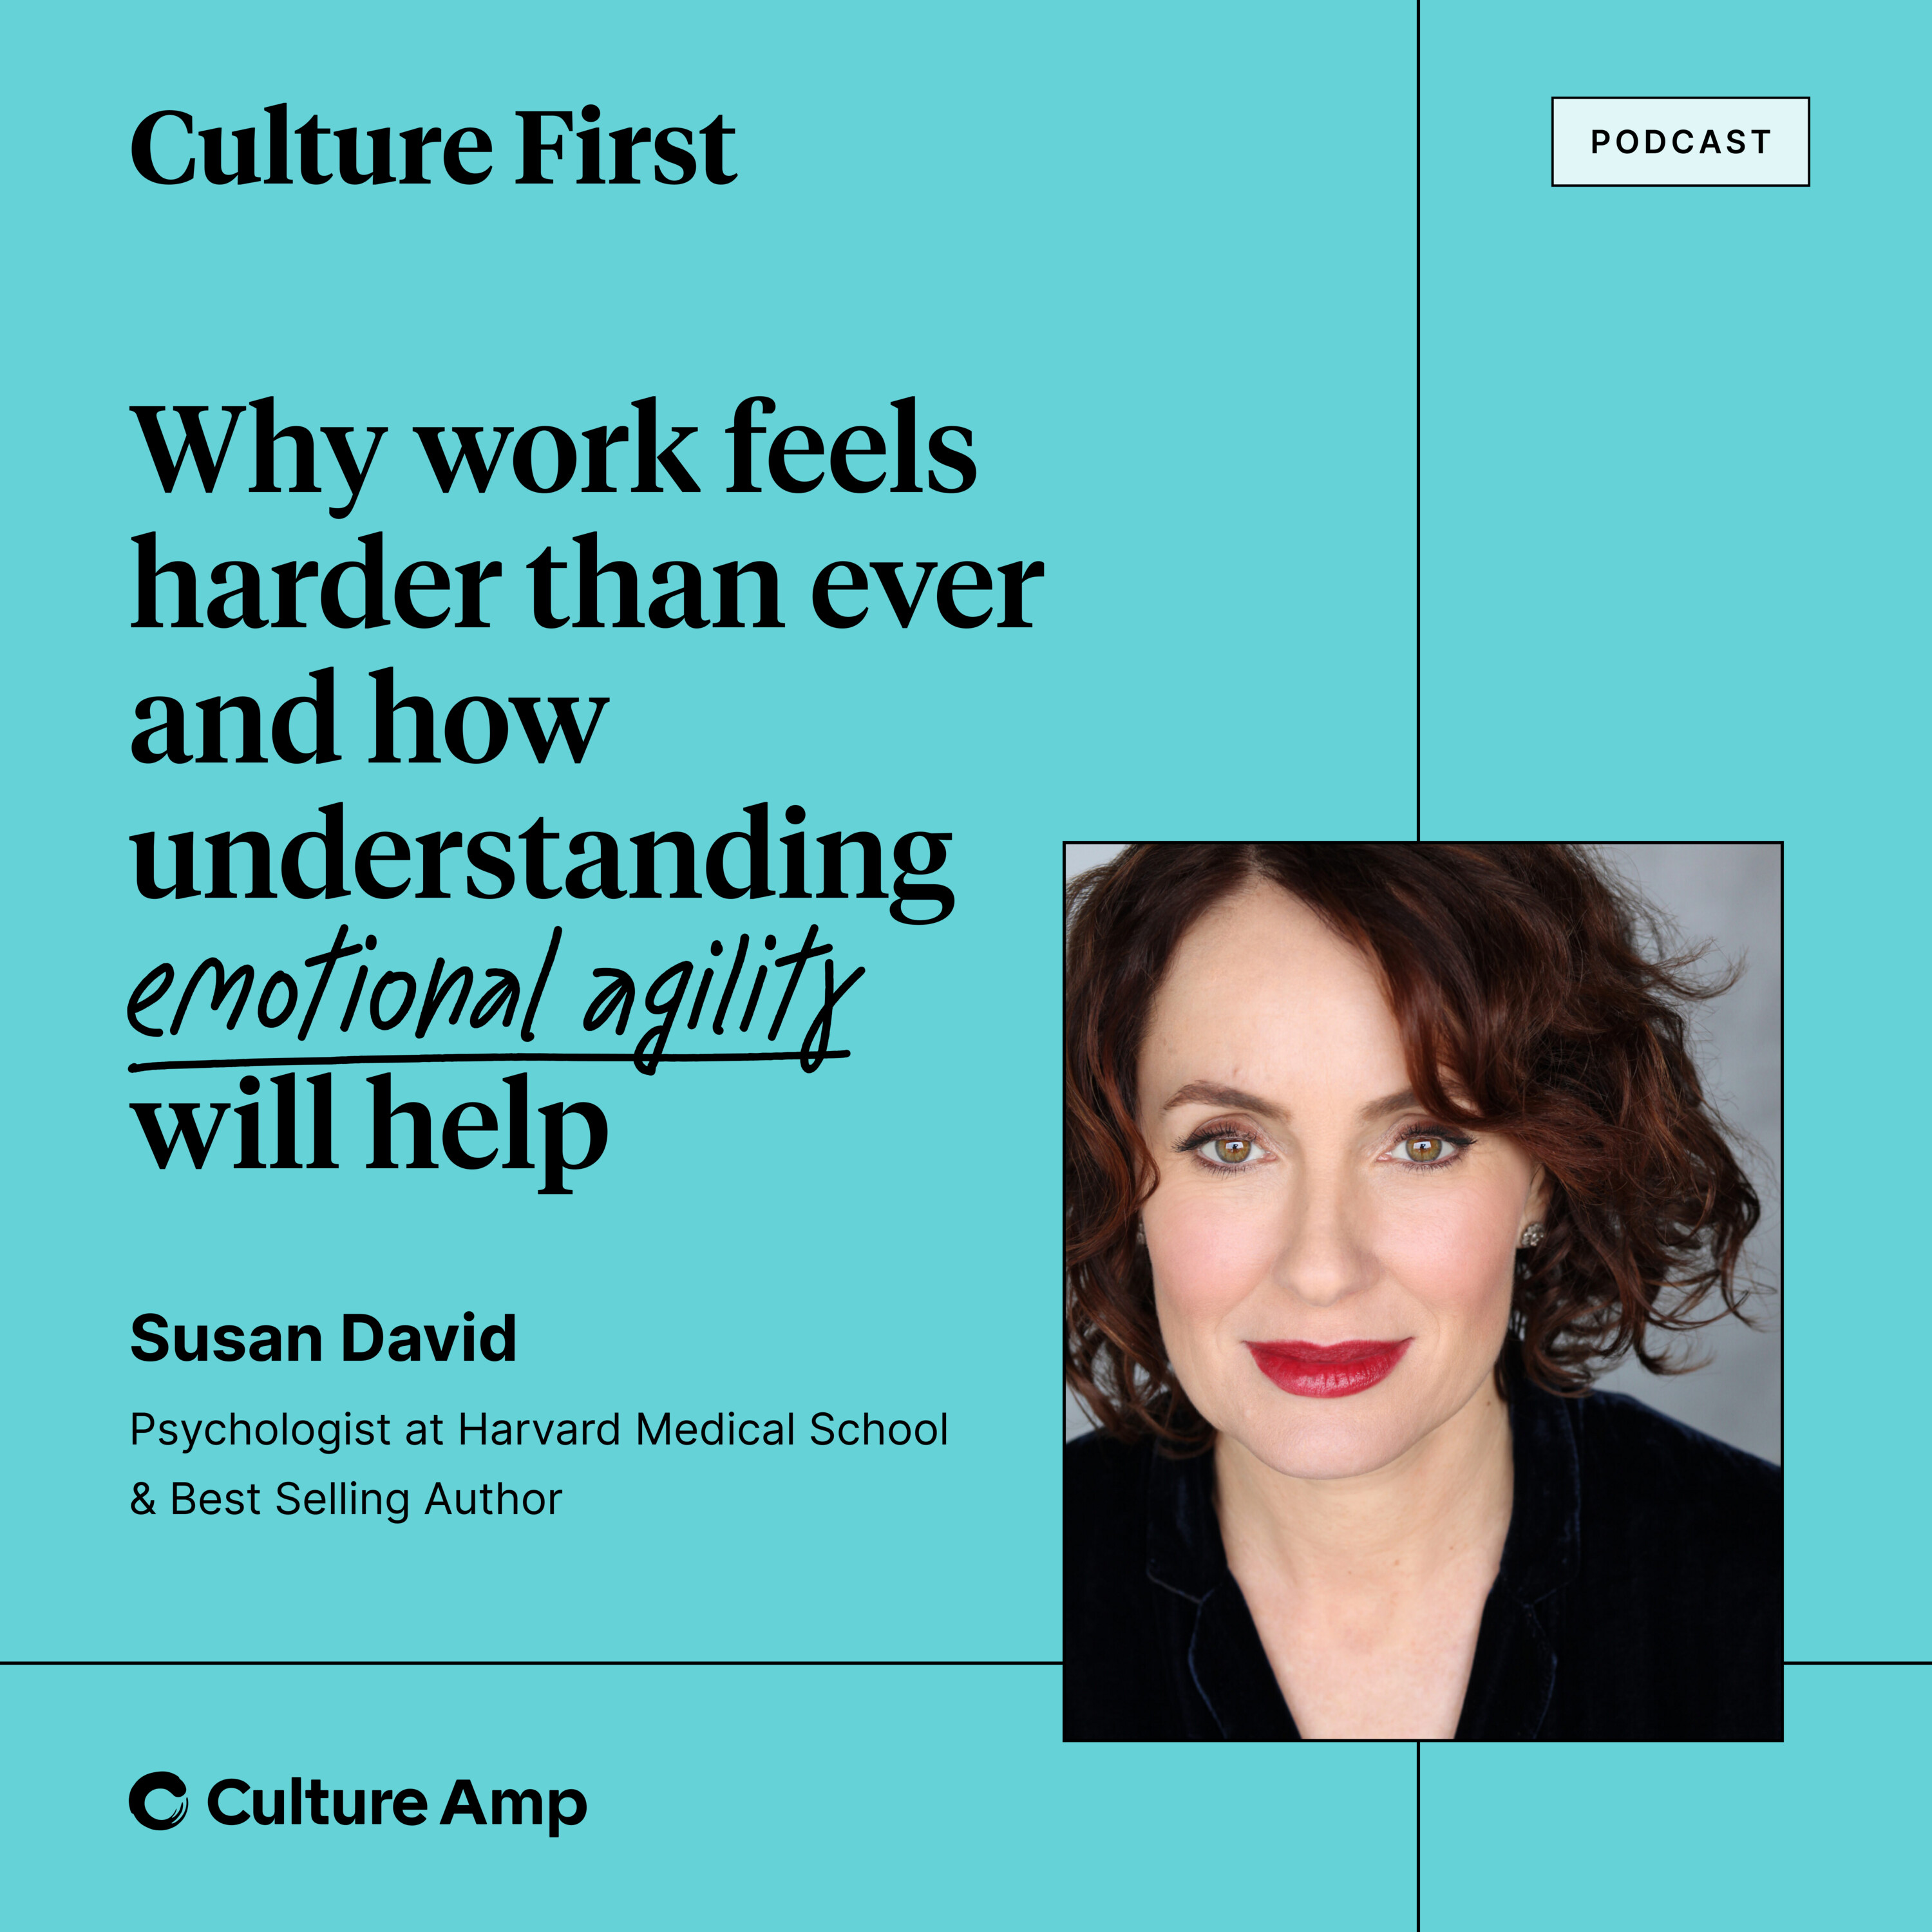 Susan David on why work feels harder than ever and how understanding emotional agility will help.